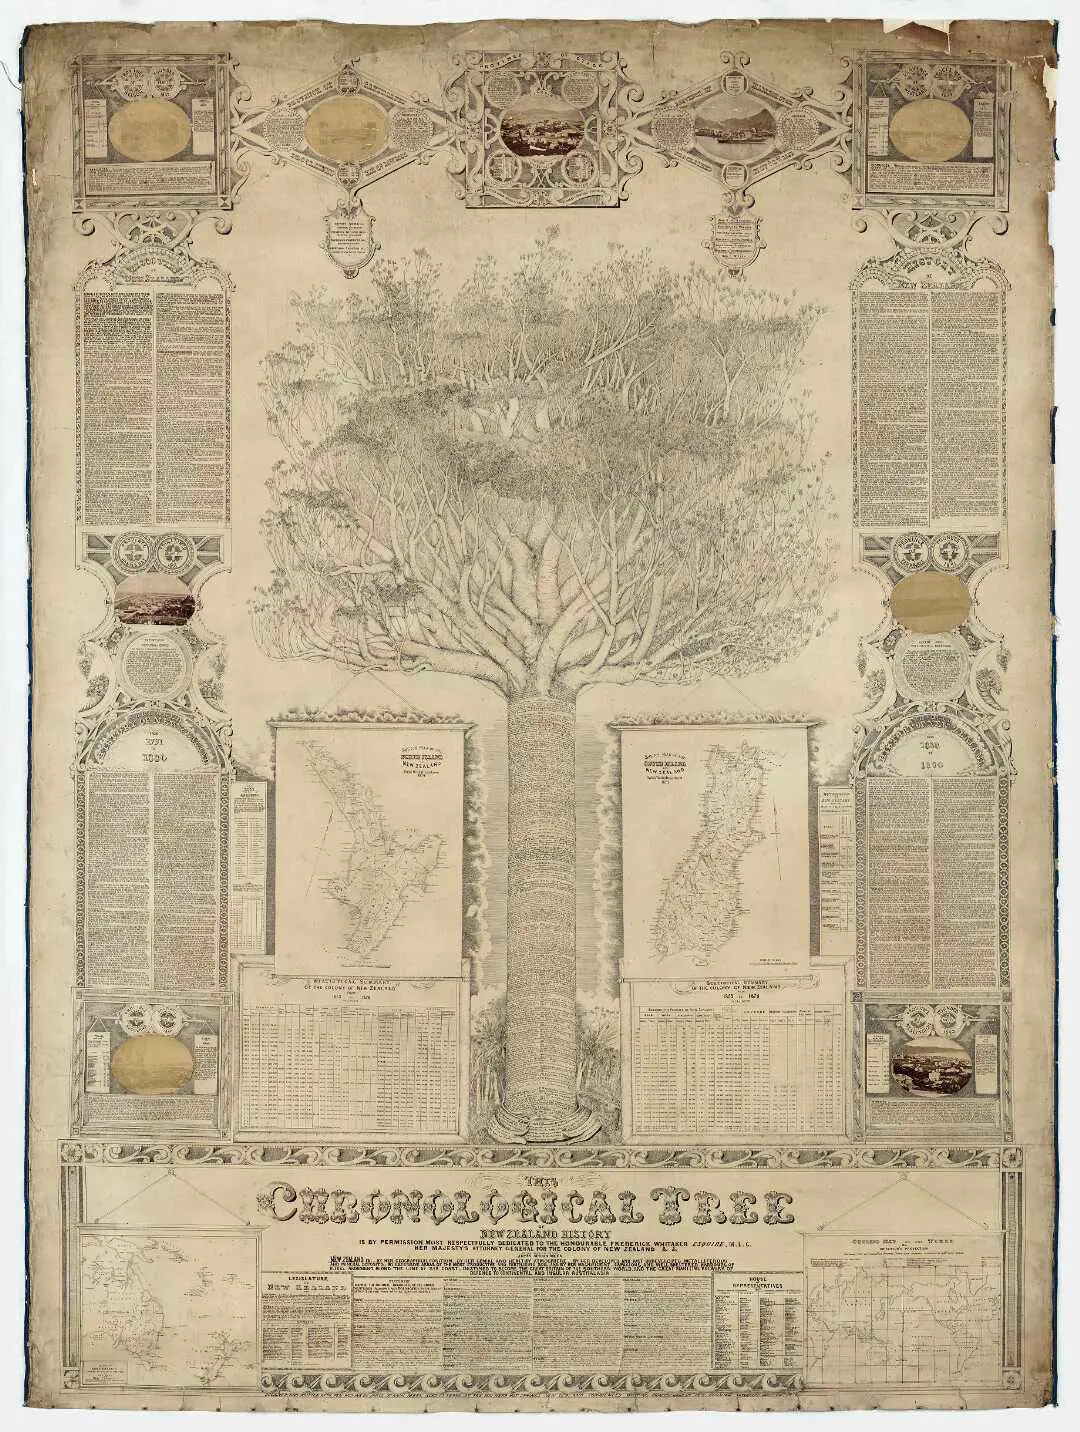 Shows a kauri tree with historical facts recorded on the trunk, as well as in panels and tables surrounding it. Also shows maps of the North and South Islands, of Australasia and of the World. Includes small photographic inserts, the photographs covering the main centres in New Zealand, from each of the then existing provinces.

